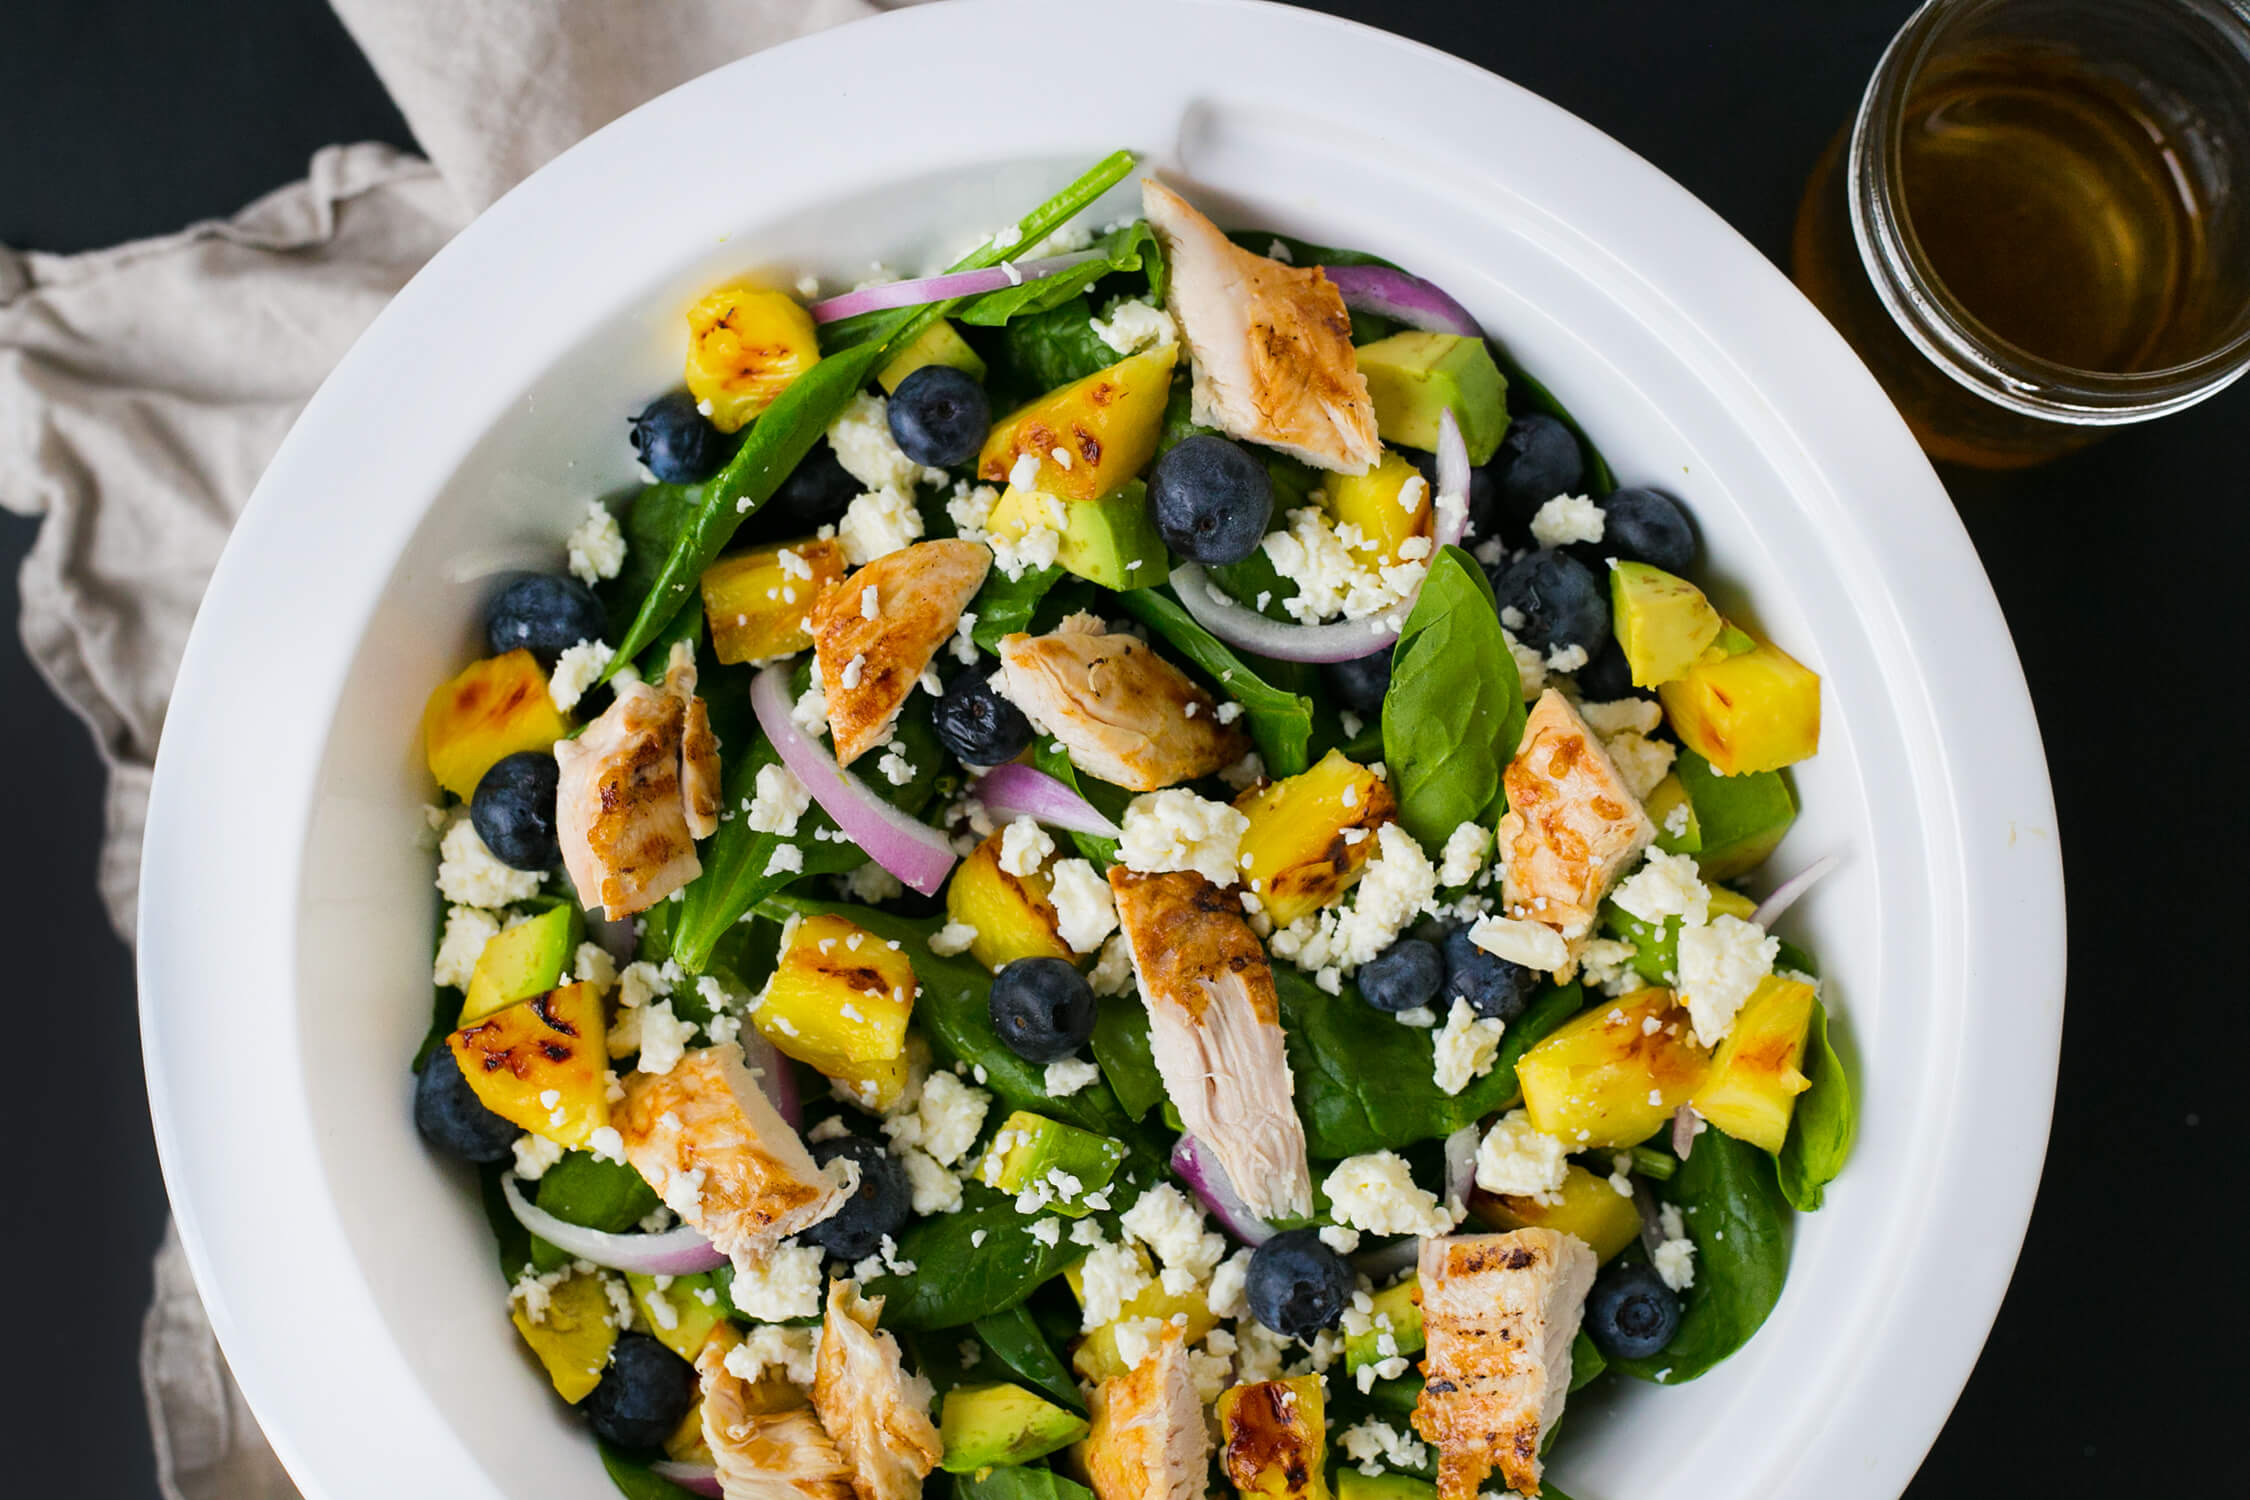 20 Summer-Inspired Meals Your Clients Will Love: Grilled Pineapple & Chicken Salad